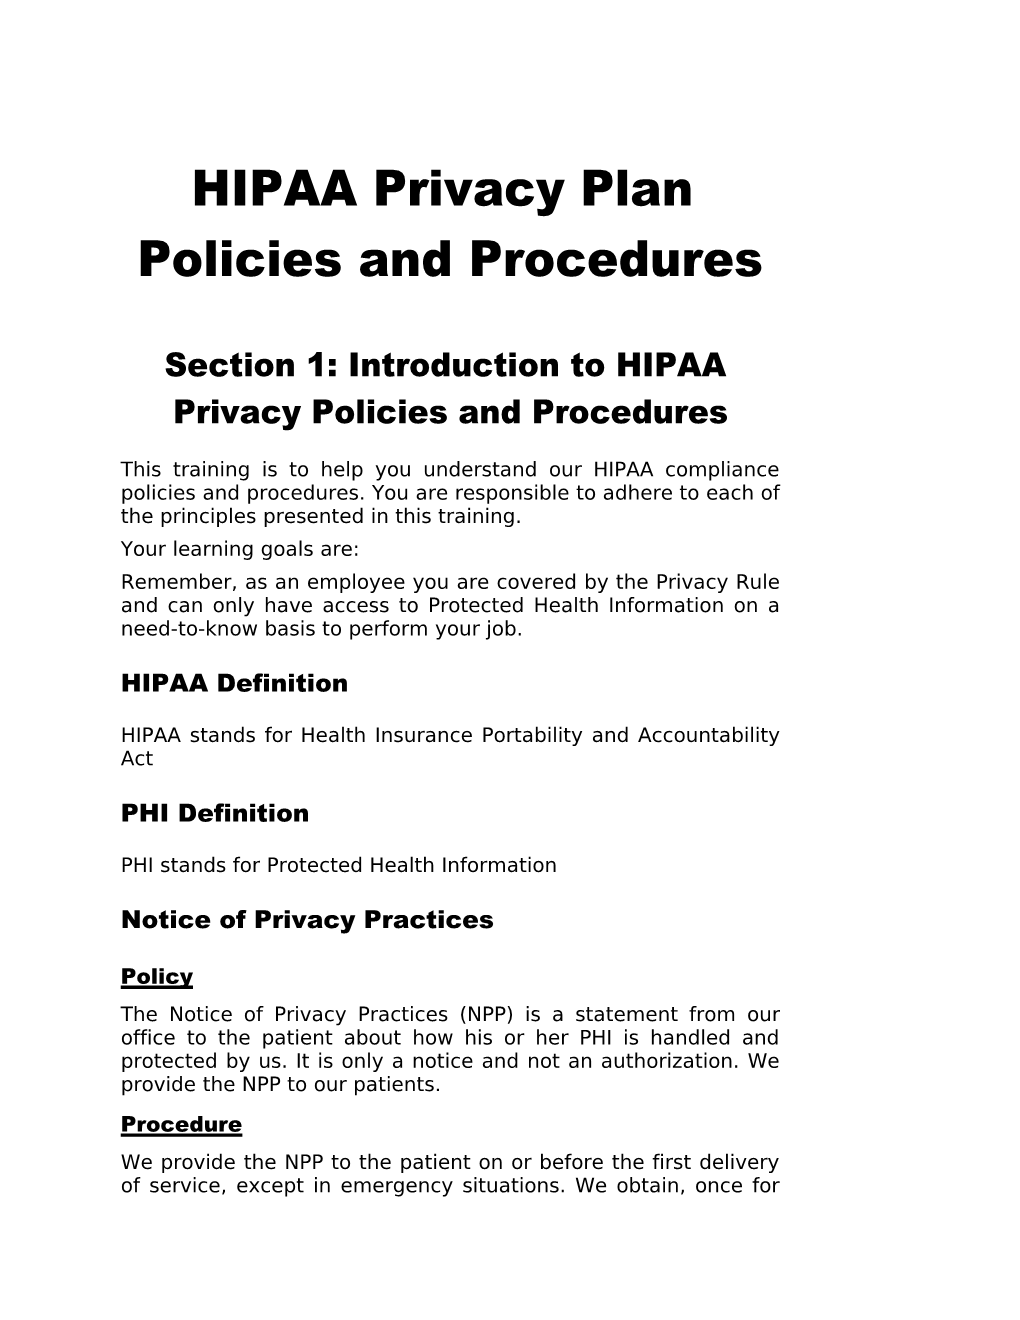 HIPAA Privacy Plan Policies and Procedures